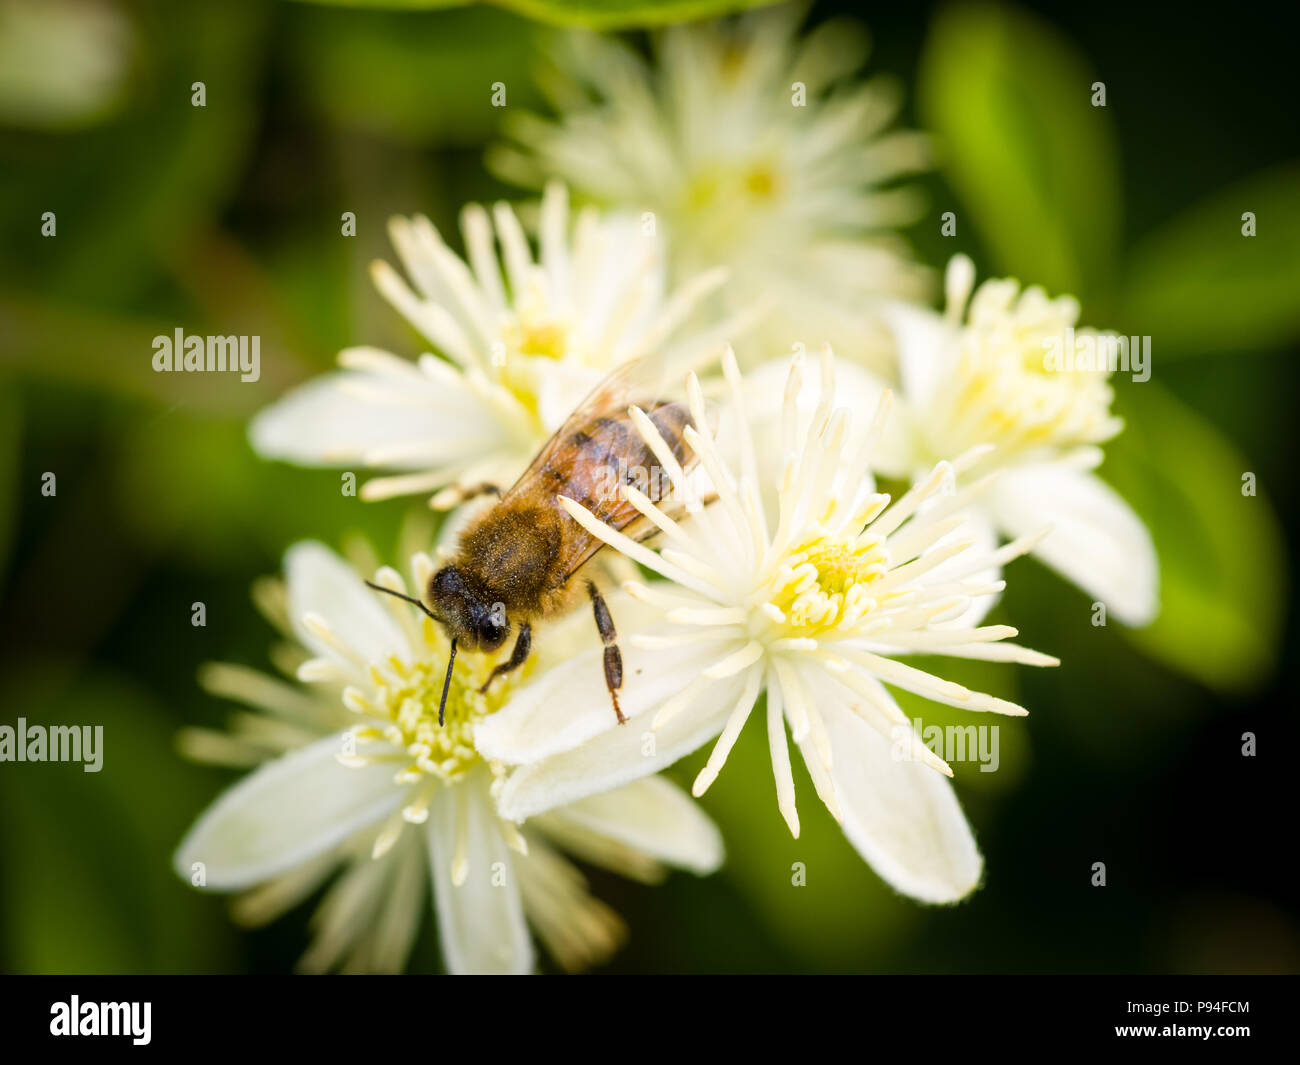 Solitary Honey Bee feeding on a Clematis, Ranunculaceae flower. Stock Photo